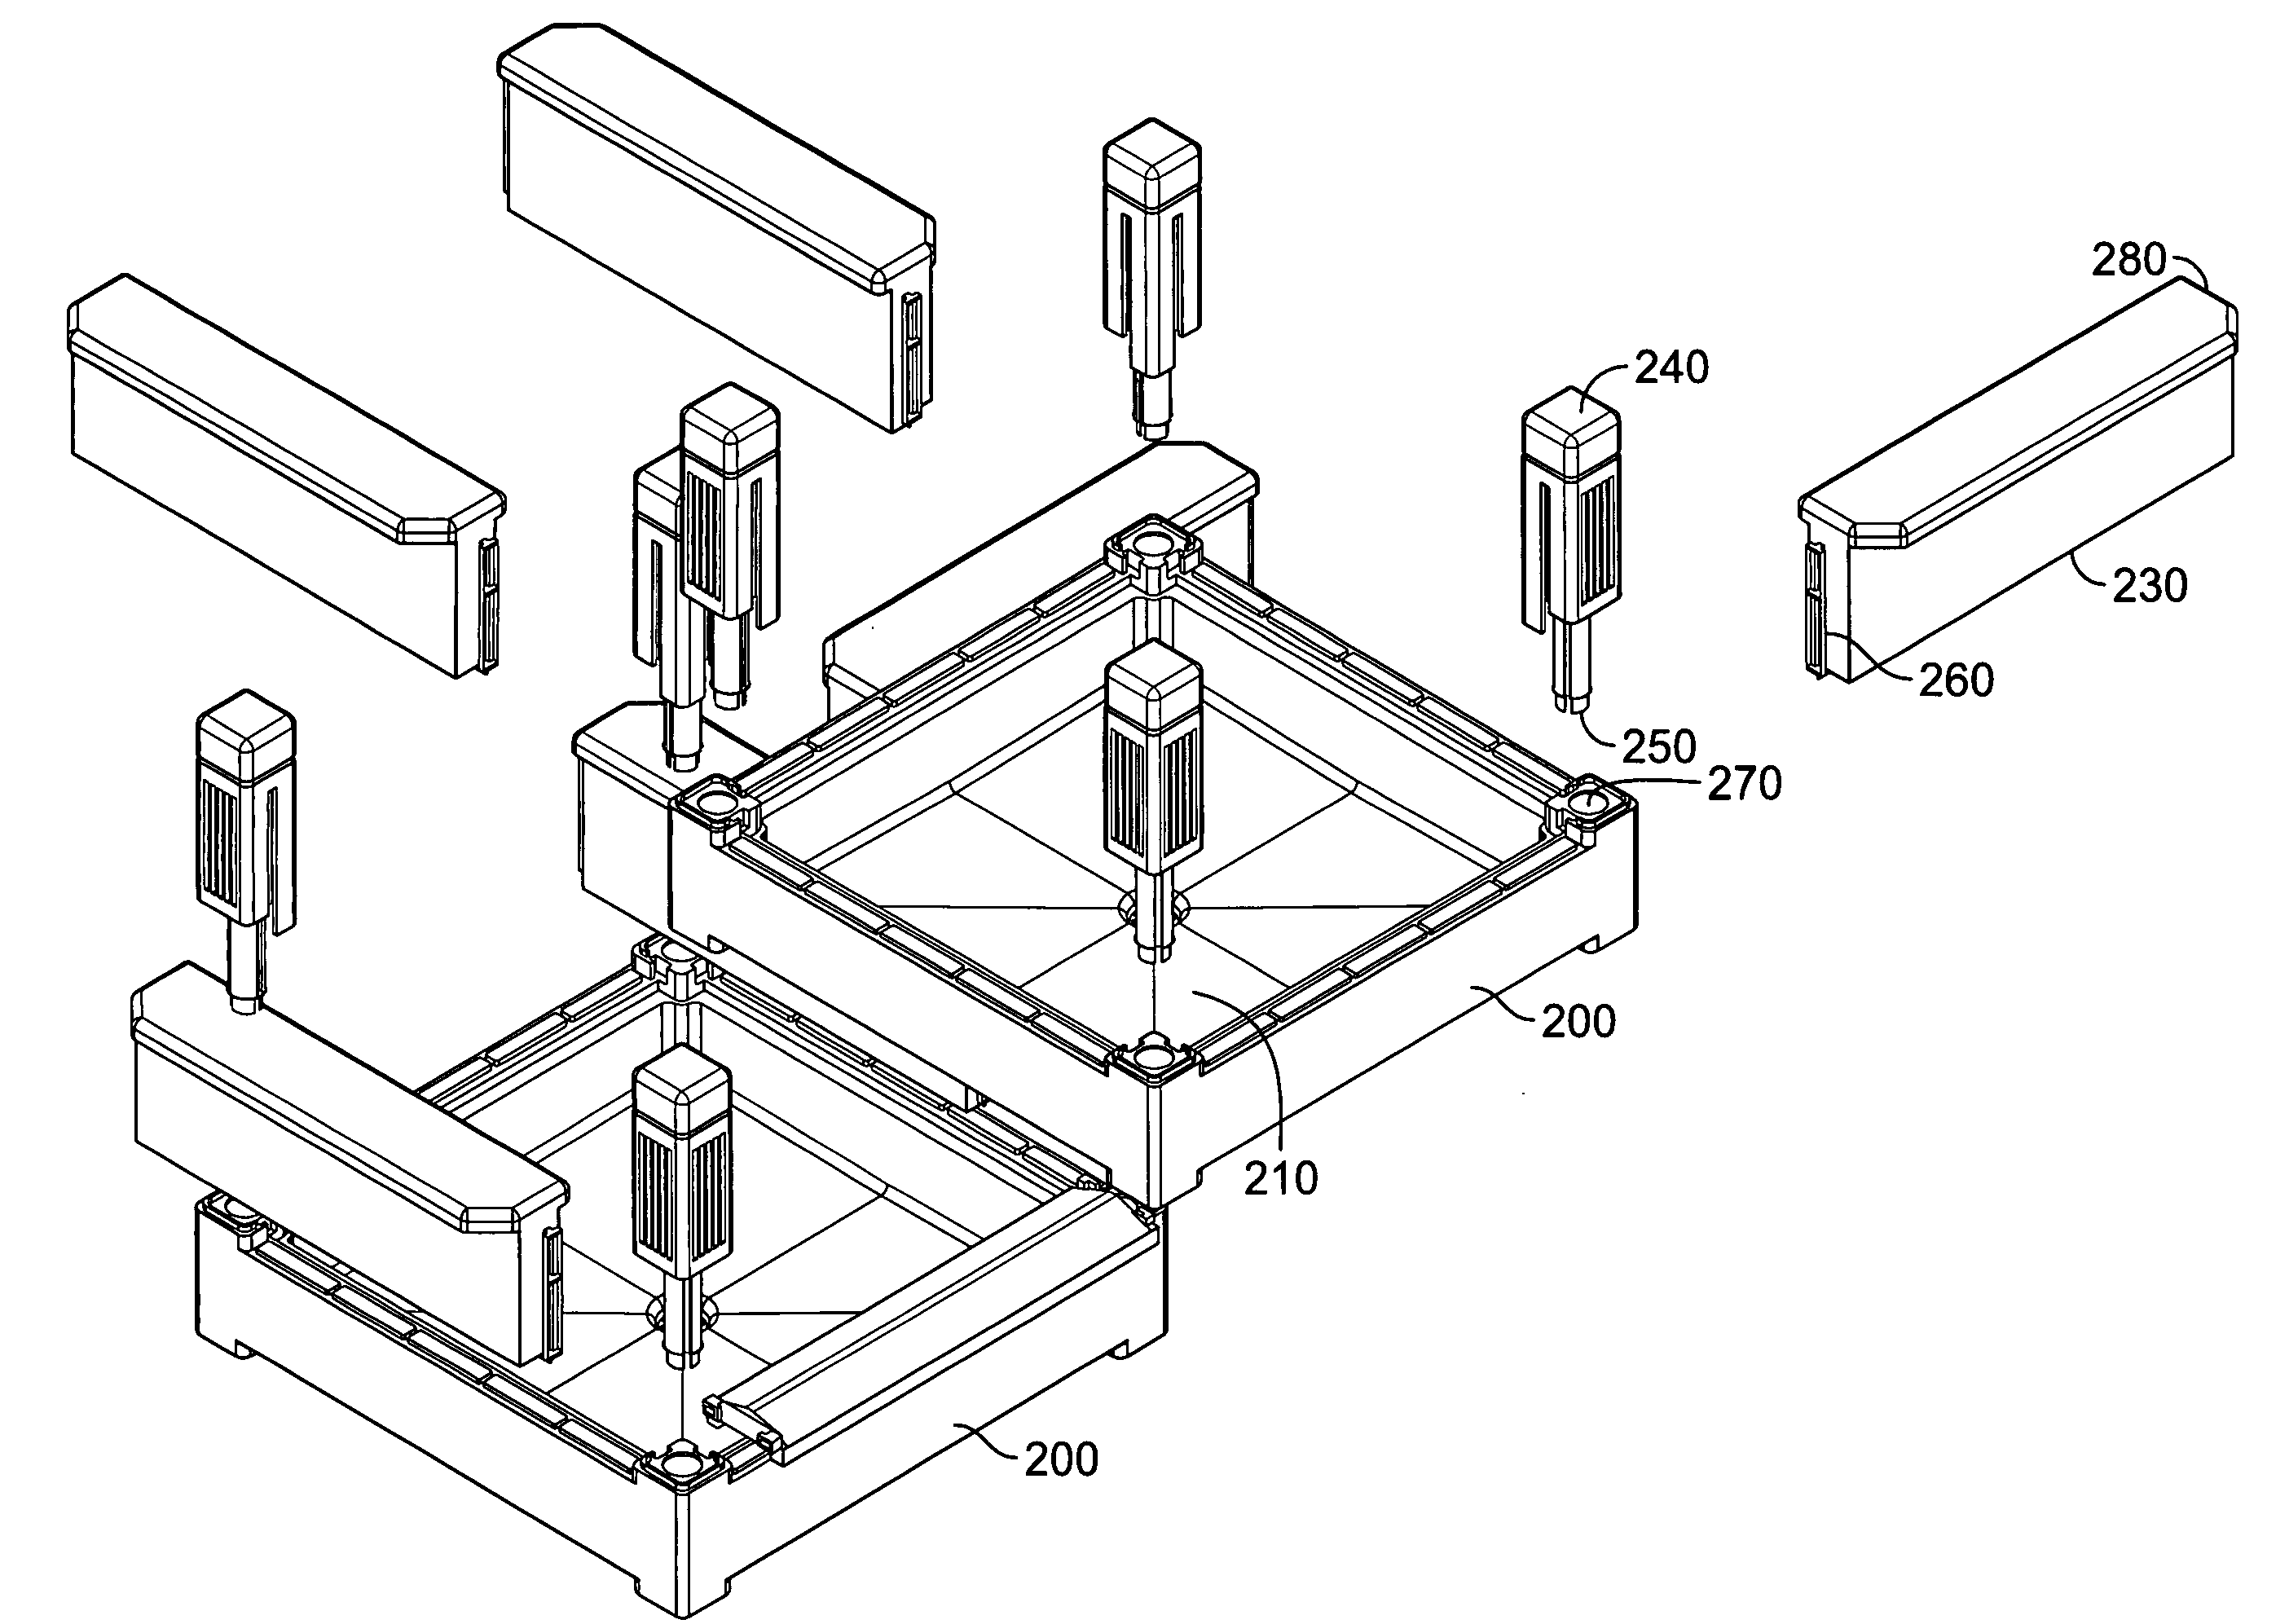 Modular roof, deck and patio apparatus, including modular panels with snap connection features